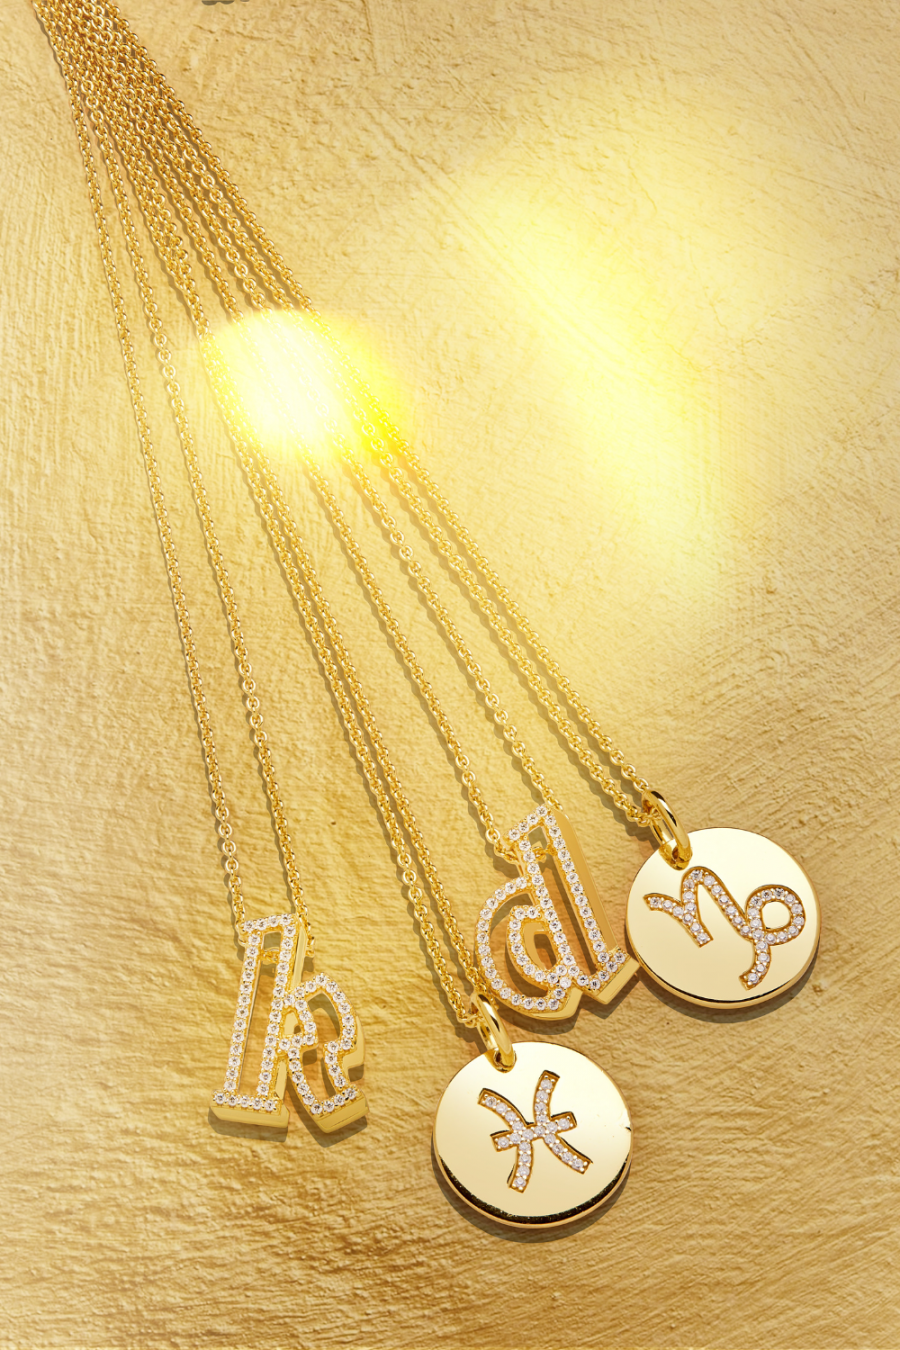 Monogrammed necklaces: Tα αγαπημένα κολιέ της «Carrie» είναι και πάλι στη μόδα